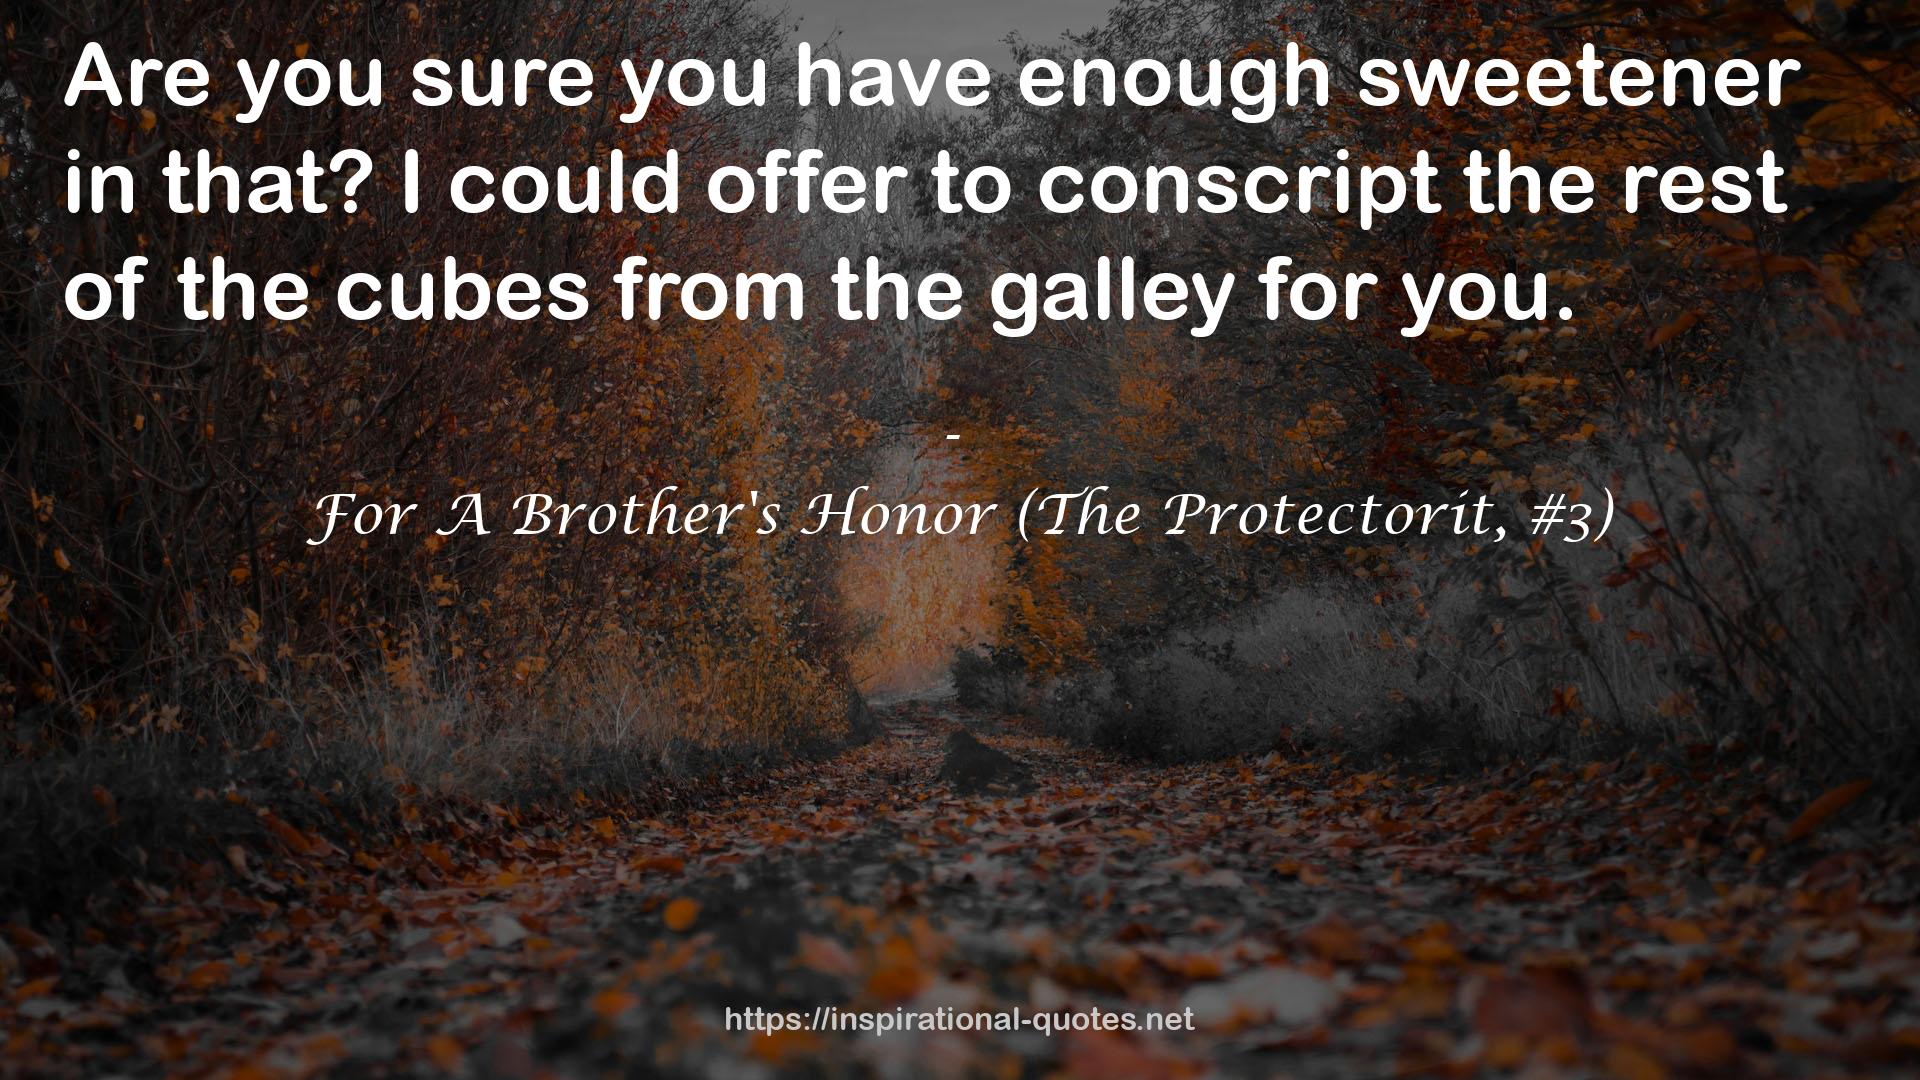 For A Brother's Honor (The Protectorit, #3) QUOTES